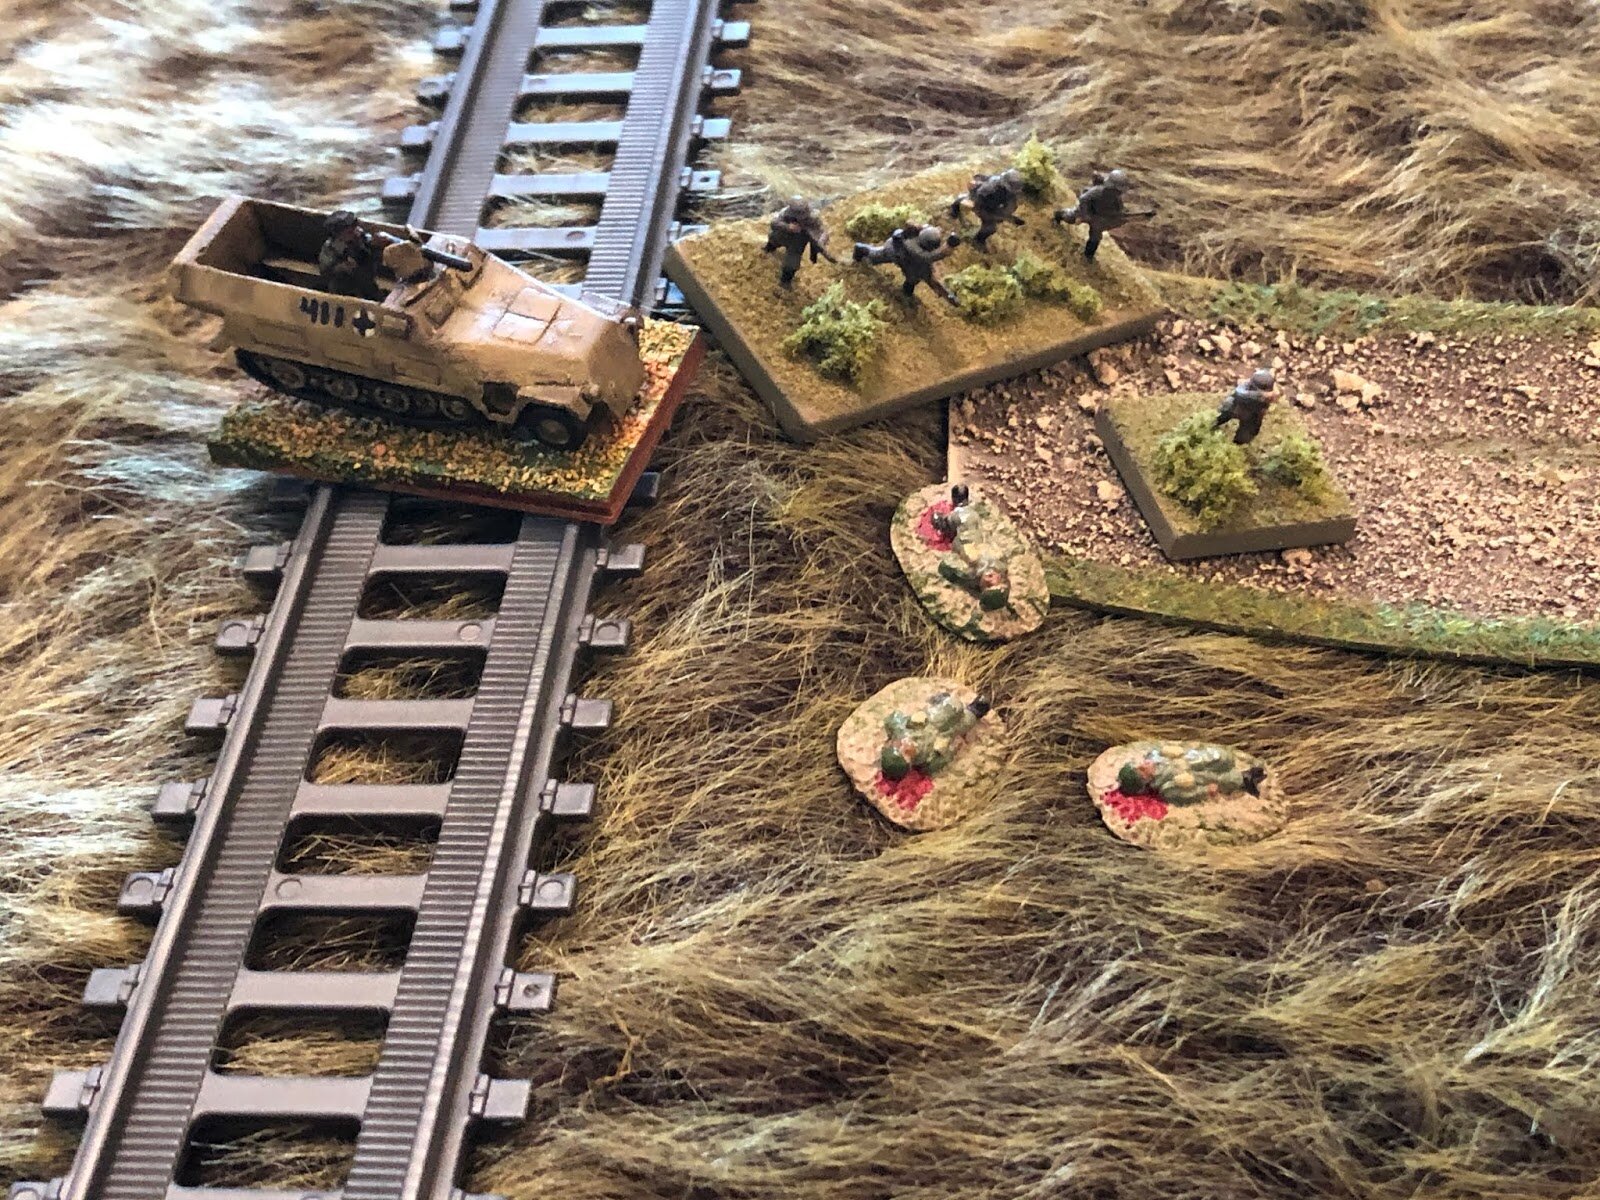  But the Soviet conscripts were just as surprised to see him as he was them!!!  The veteran German Platoon Commander stood on the trigger of his MG-42, allowing time for the 2nd Platoon's Platoon Commander and 1st Squad to dismount and finish off the